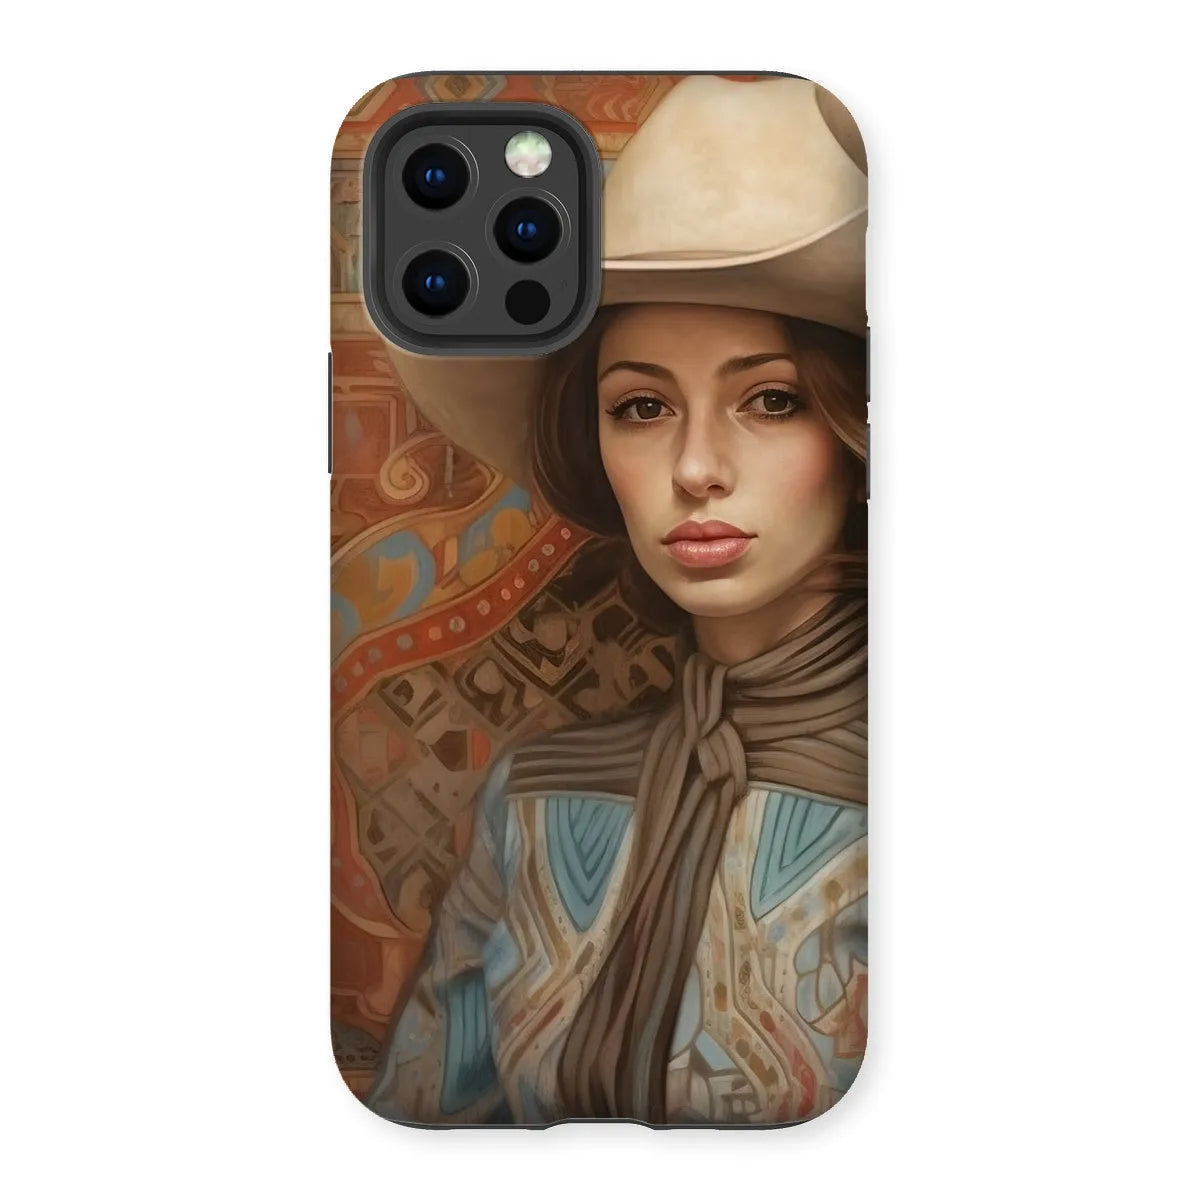 Anahita The Lesbian Cowgirl - Sapphic Art Phone Case - Iphone 12 Pro / Matte - Mobile Phone Cases - Aesthetic Art